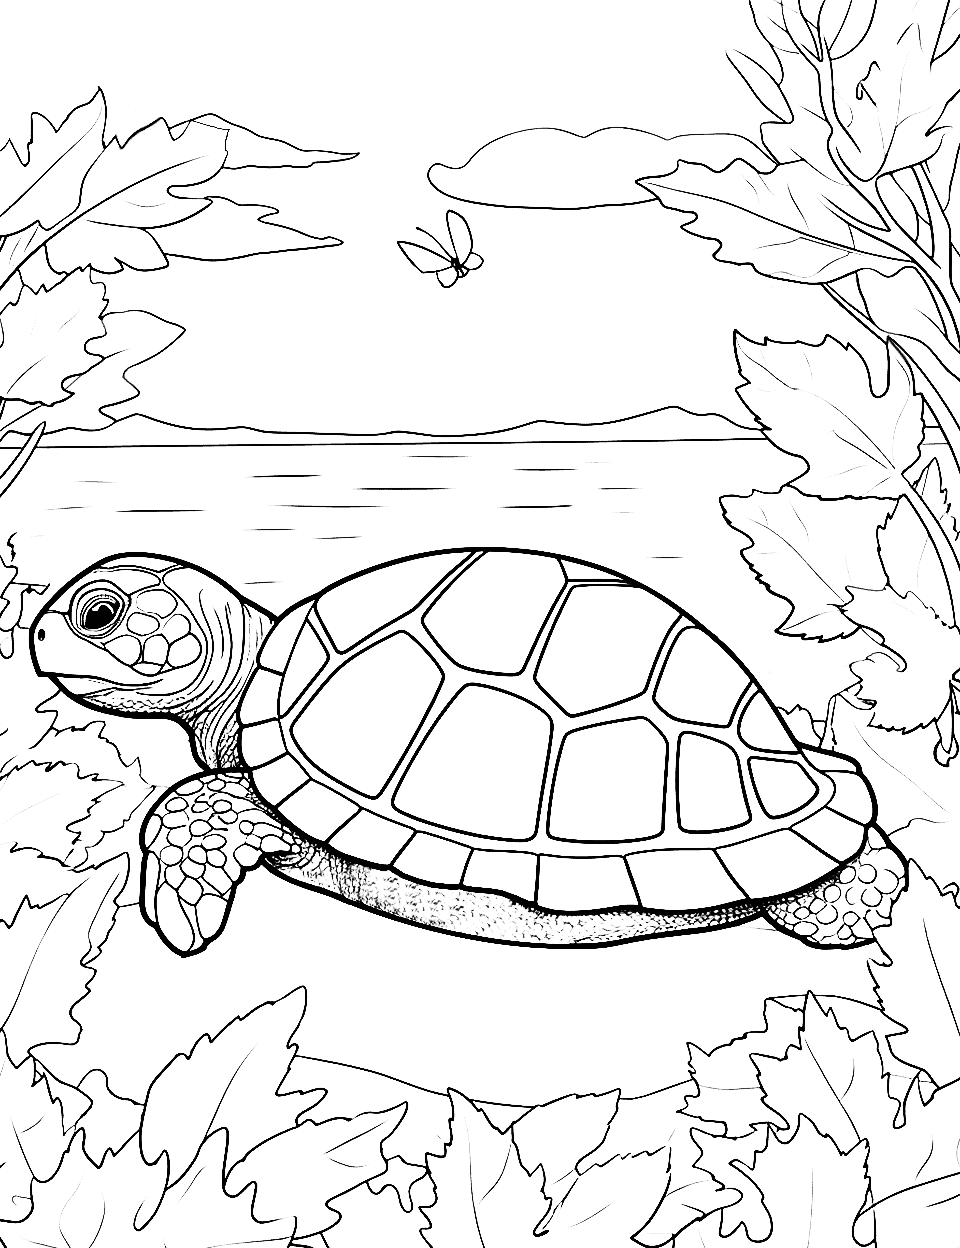 Turtle coloring pages free printable sheets